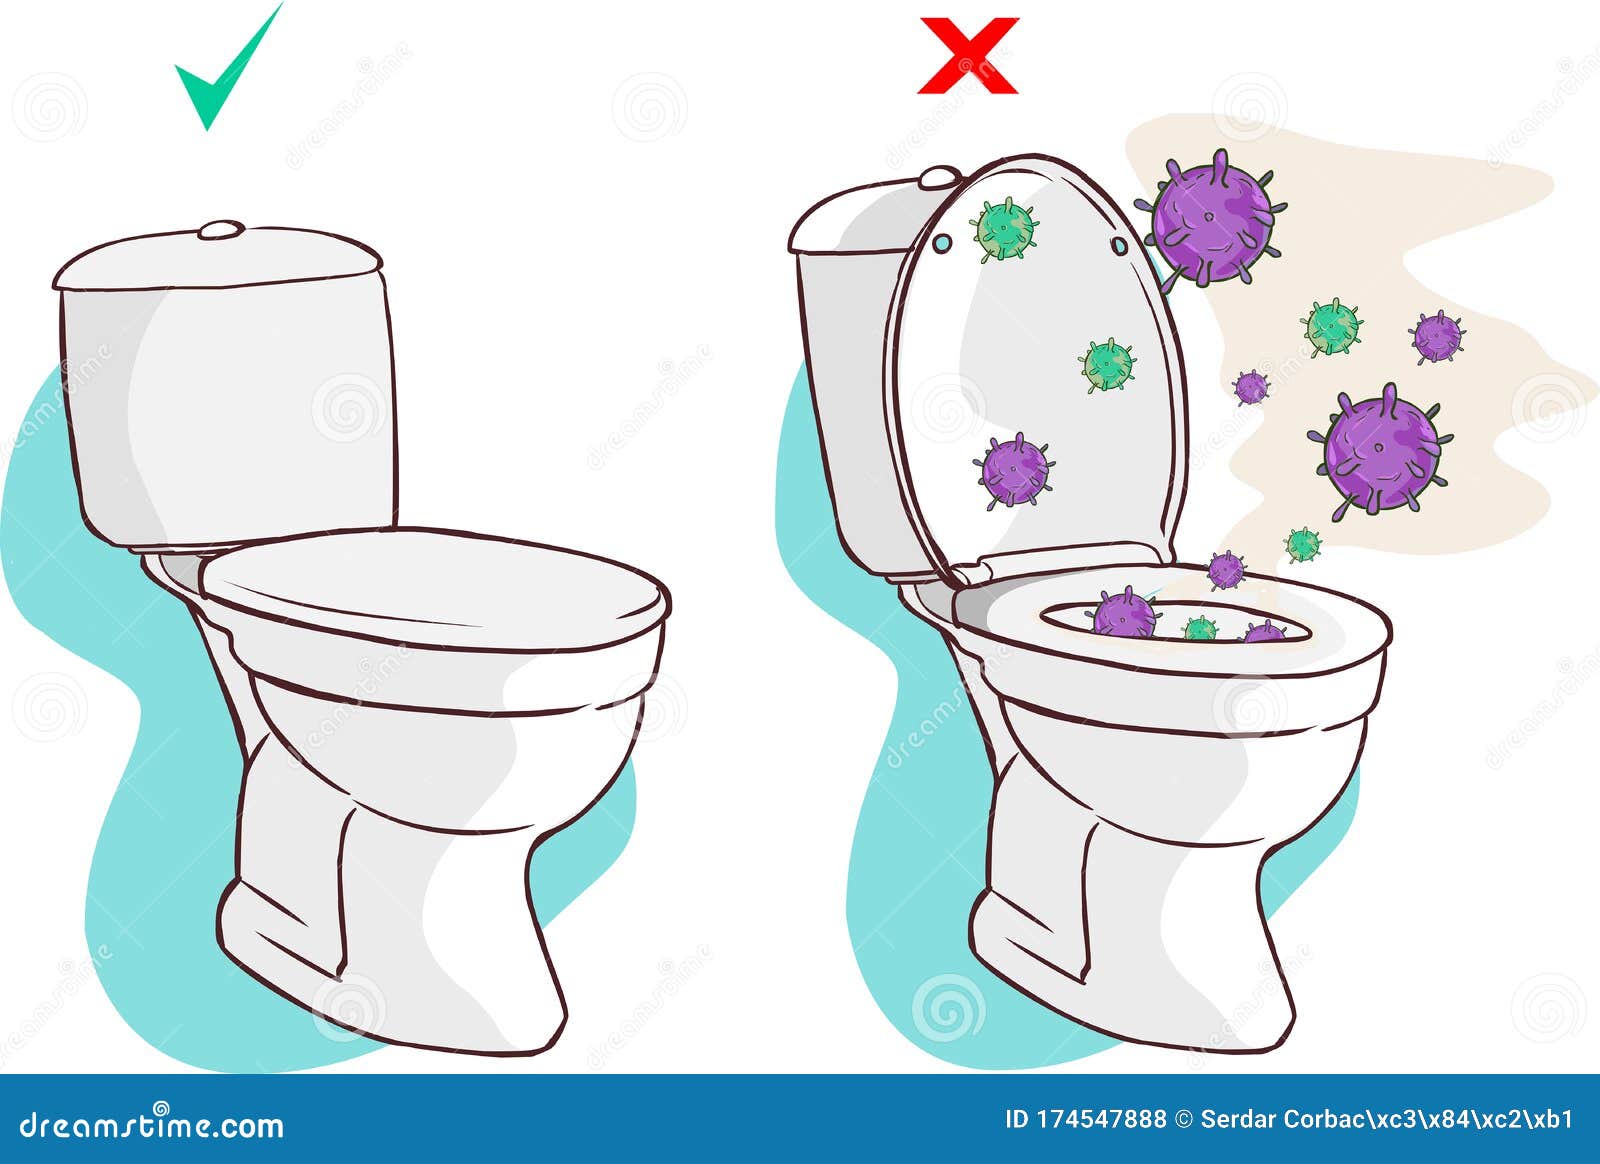 open-toilet-lid-cause-dispersal-of-germ-as-a-result-of-flushing-cartoon